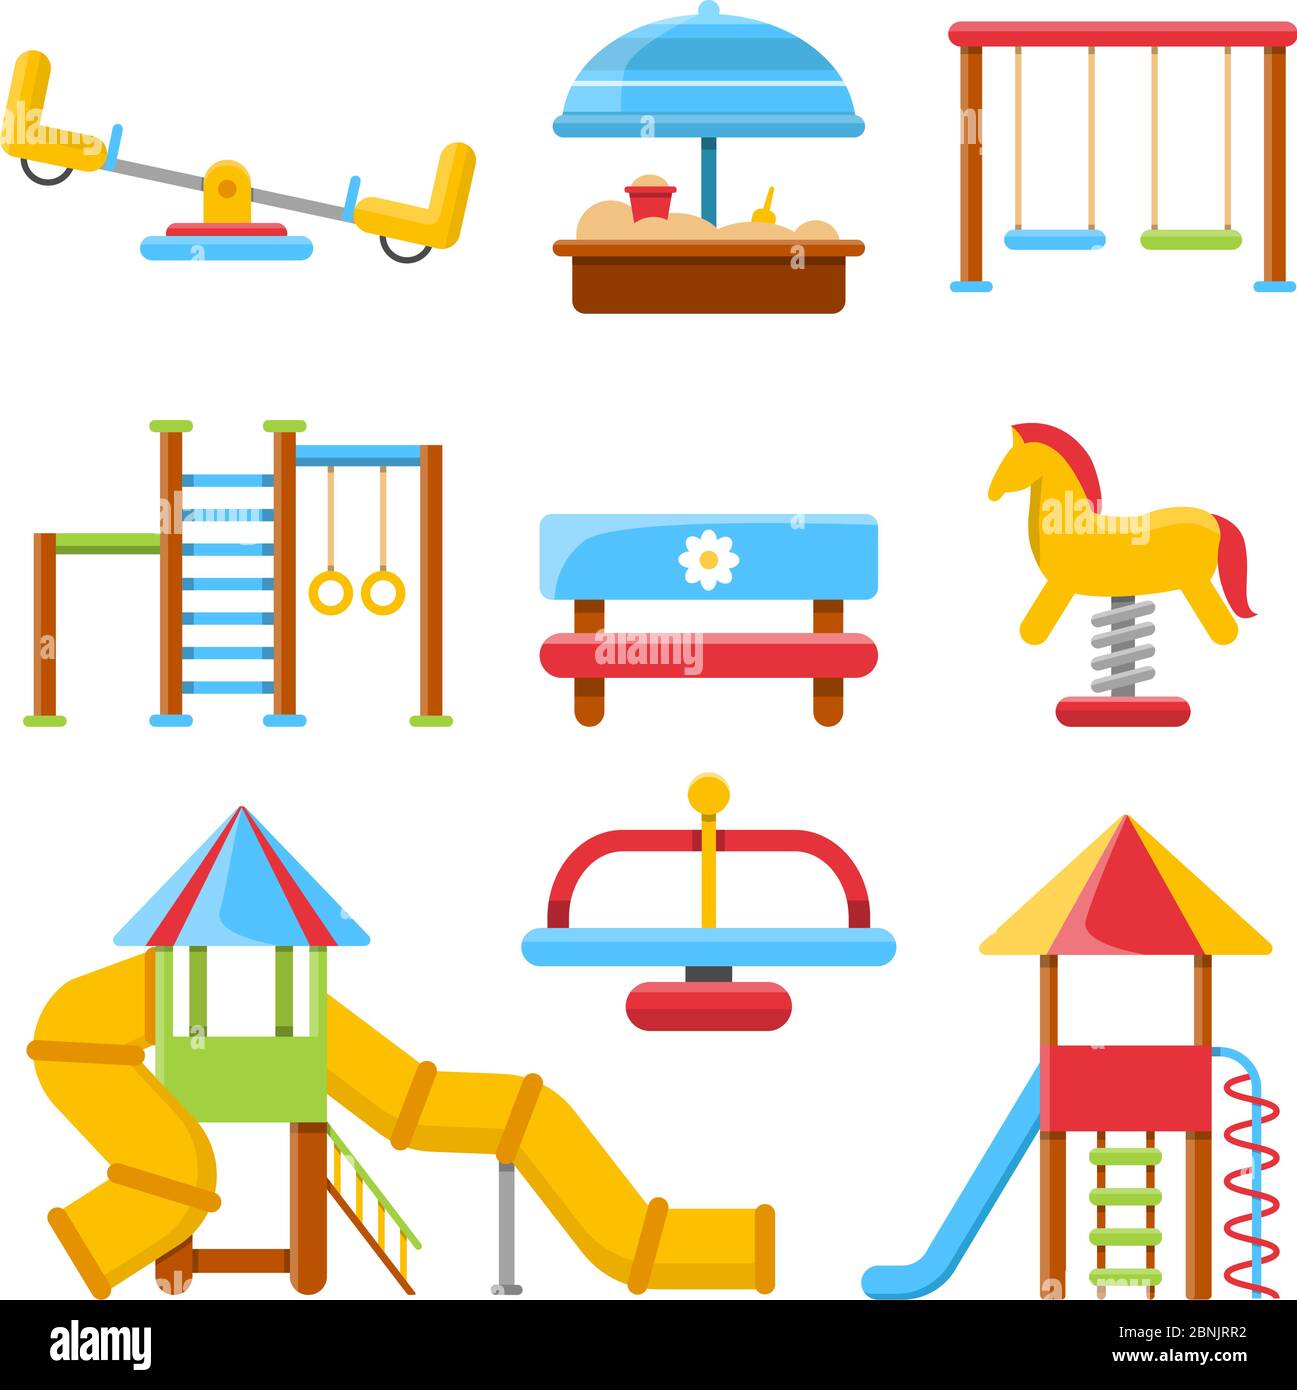 Flat illustrations of kids playground with various equipment Stock Vector